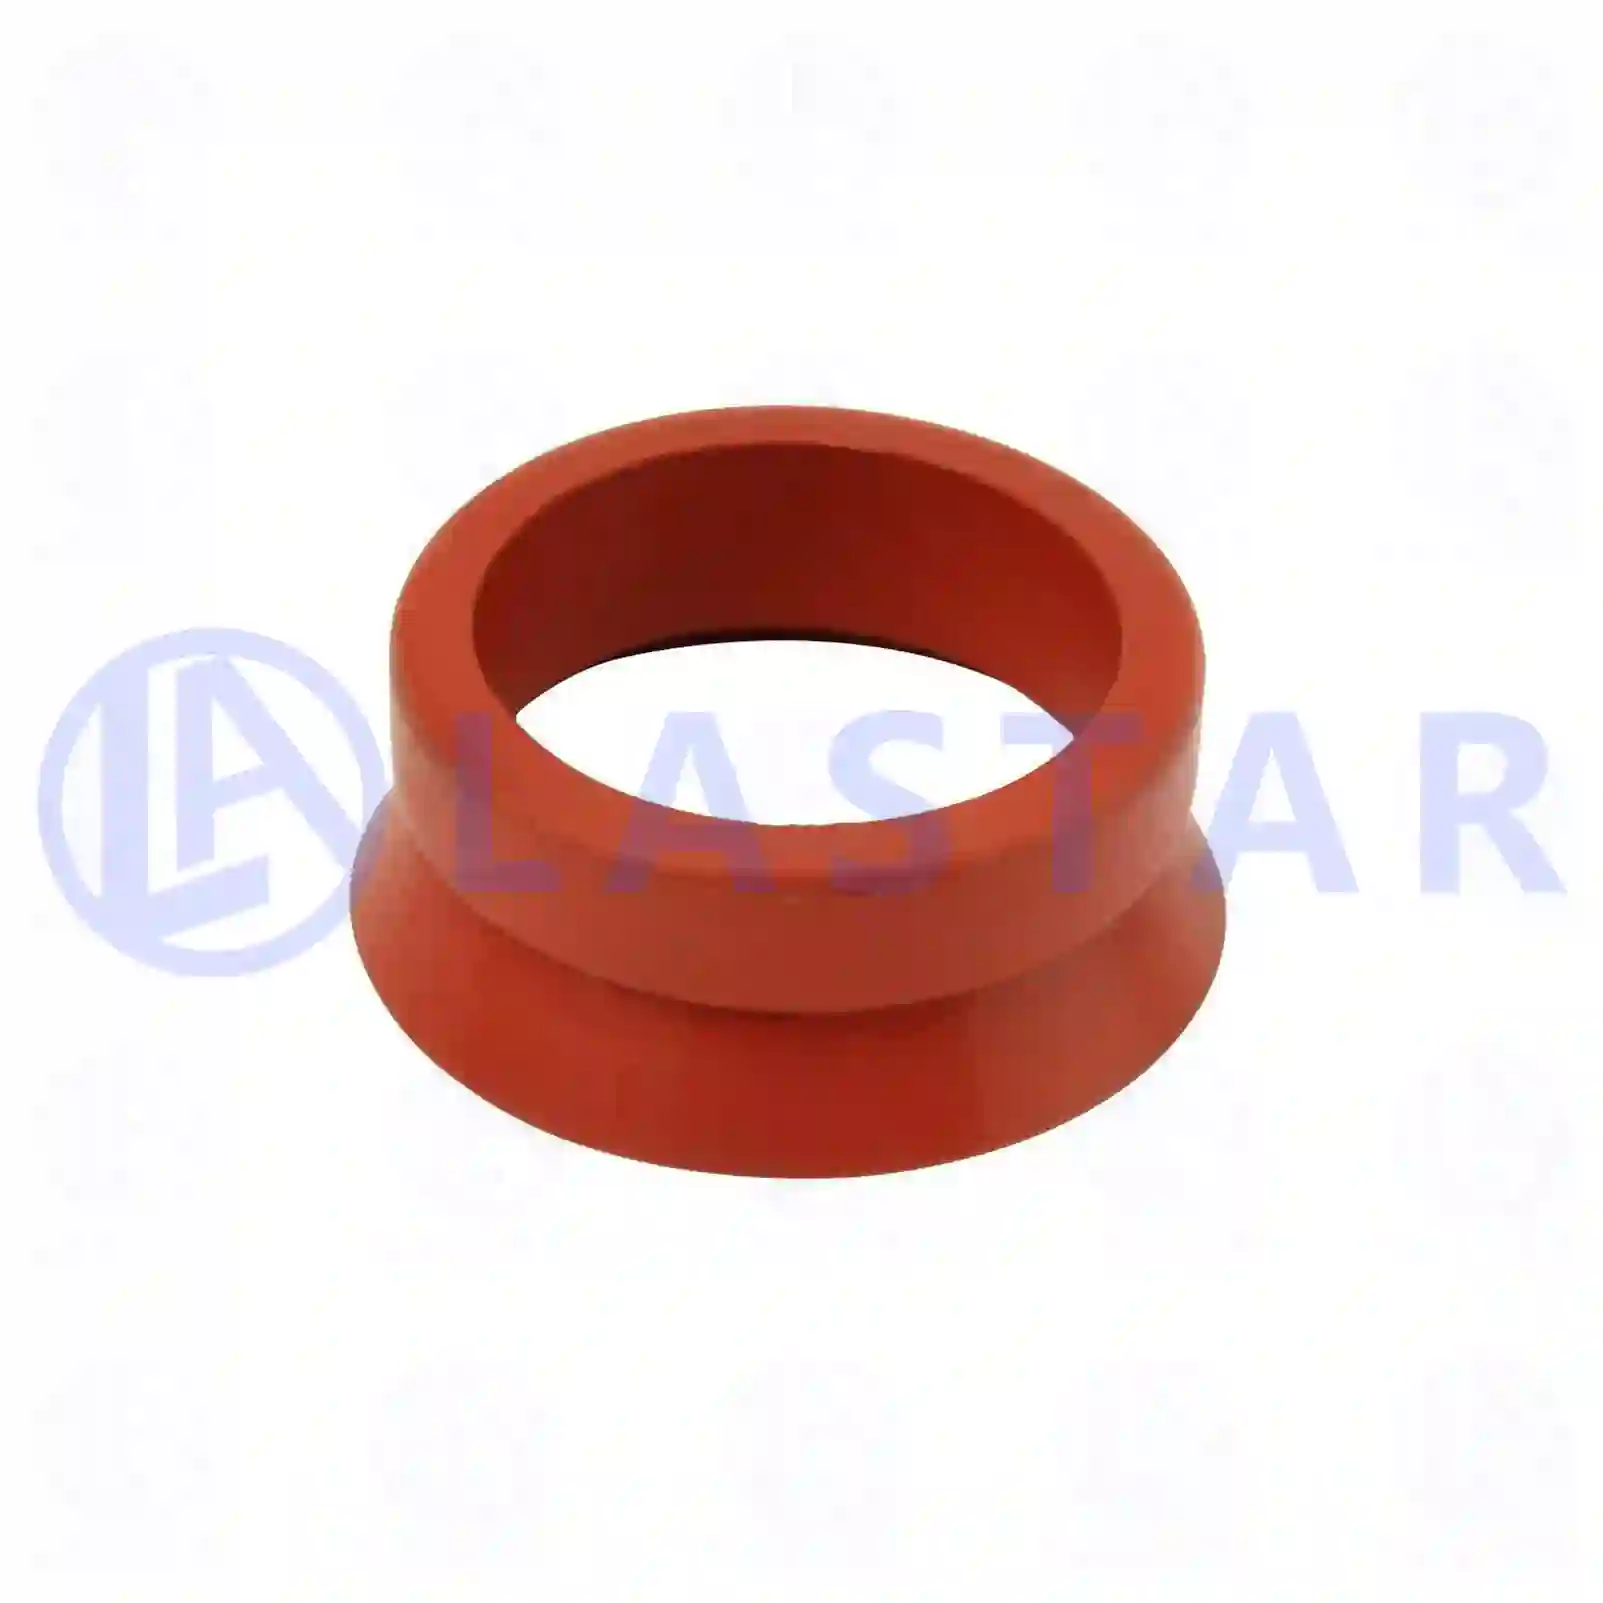 Seal ring, injection nozzle, 77723707, 469455, 948965, ZG10512-0008 ||  77723707 Lastar Spare Part | Truck Spare Parts, Auotomotive Spare Parts Seal ring, injection nozzle, 77723707, 469455, 948965, ZG10512-0008 ||  77723707 Lastar Spare Part | Truck Spare Parts, Auotomotive Spare Parts